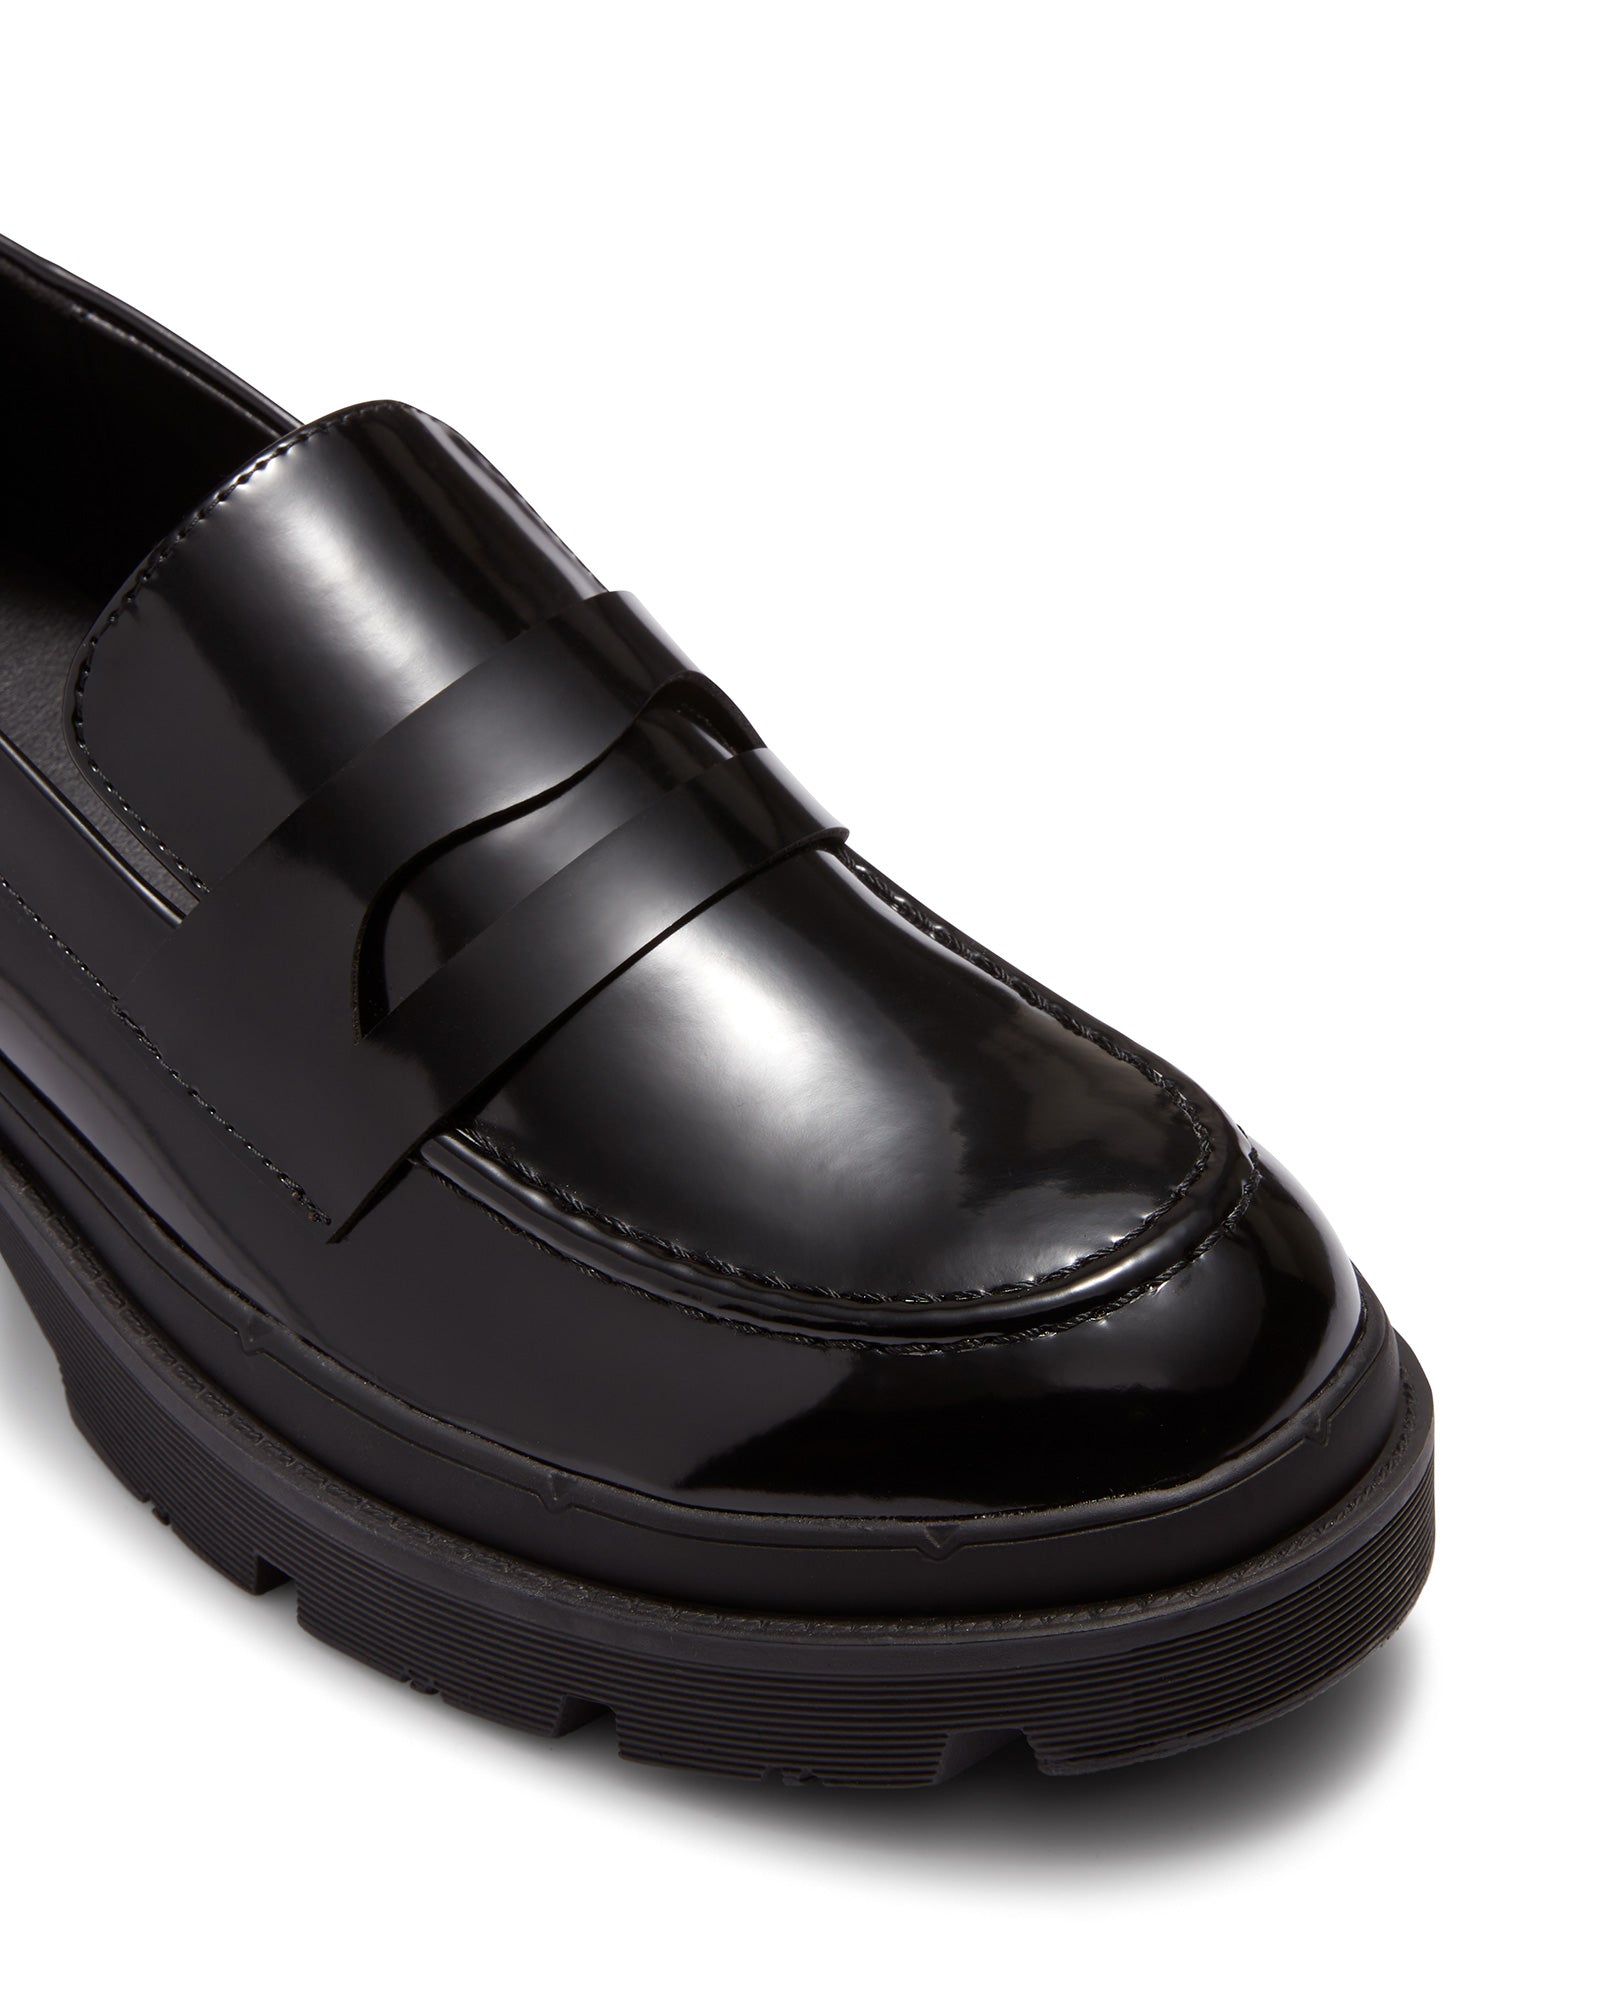 Therapy Shoes Dua Black Patent | Women's Loafers | Flats | Round Toe | Slip On